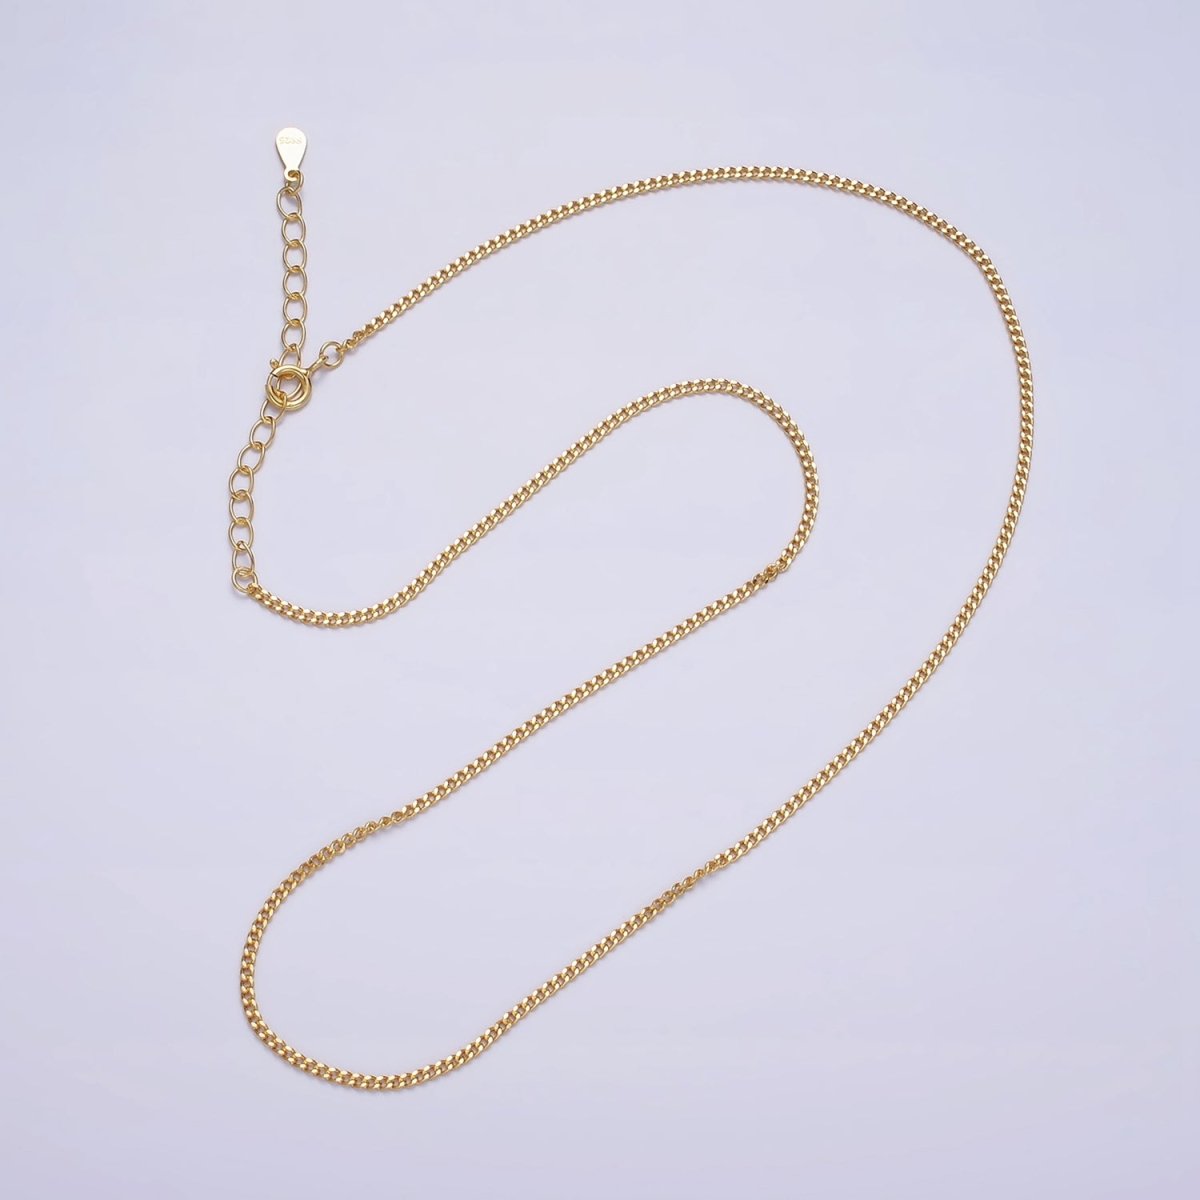 Dainty 24K Gold Vermeil Curb Chain Necklace 925 Sterling Silver Necklace Chain w/ Heavy 24K Gold Plated 15.35 inch + 2 inch extender | WA-1961 Clearance Pricing - DLUXCA